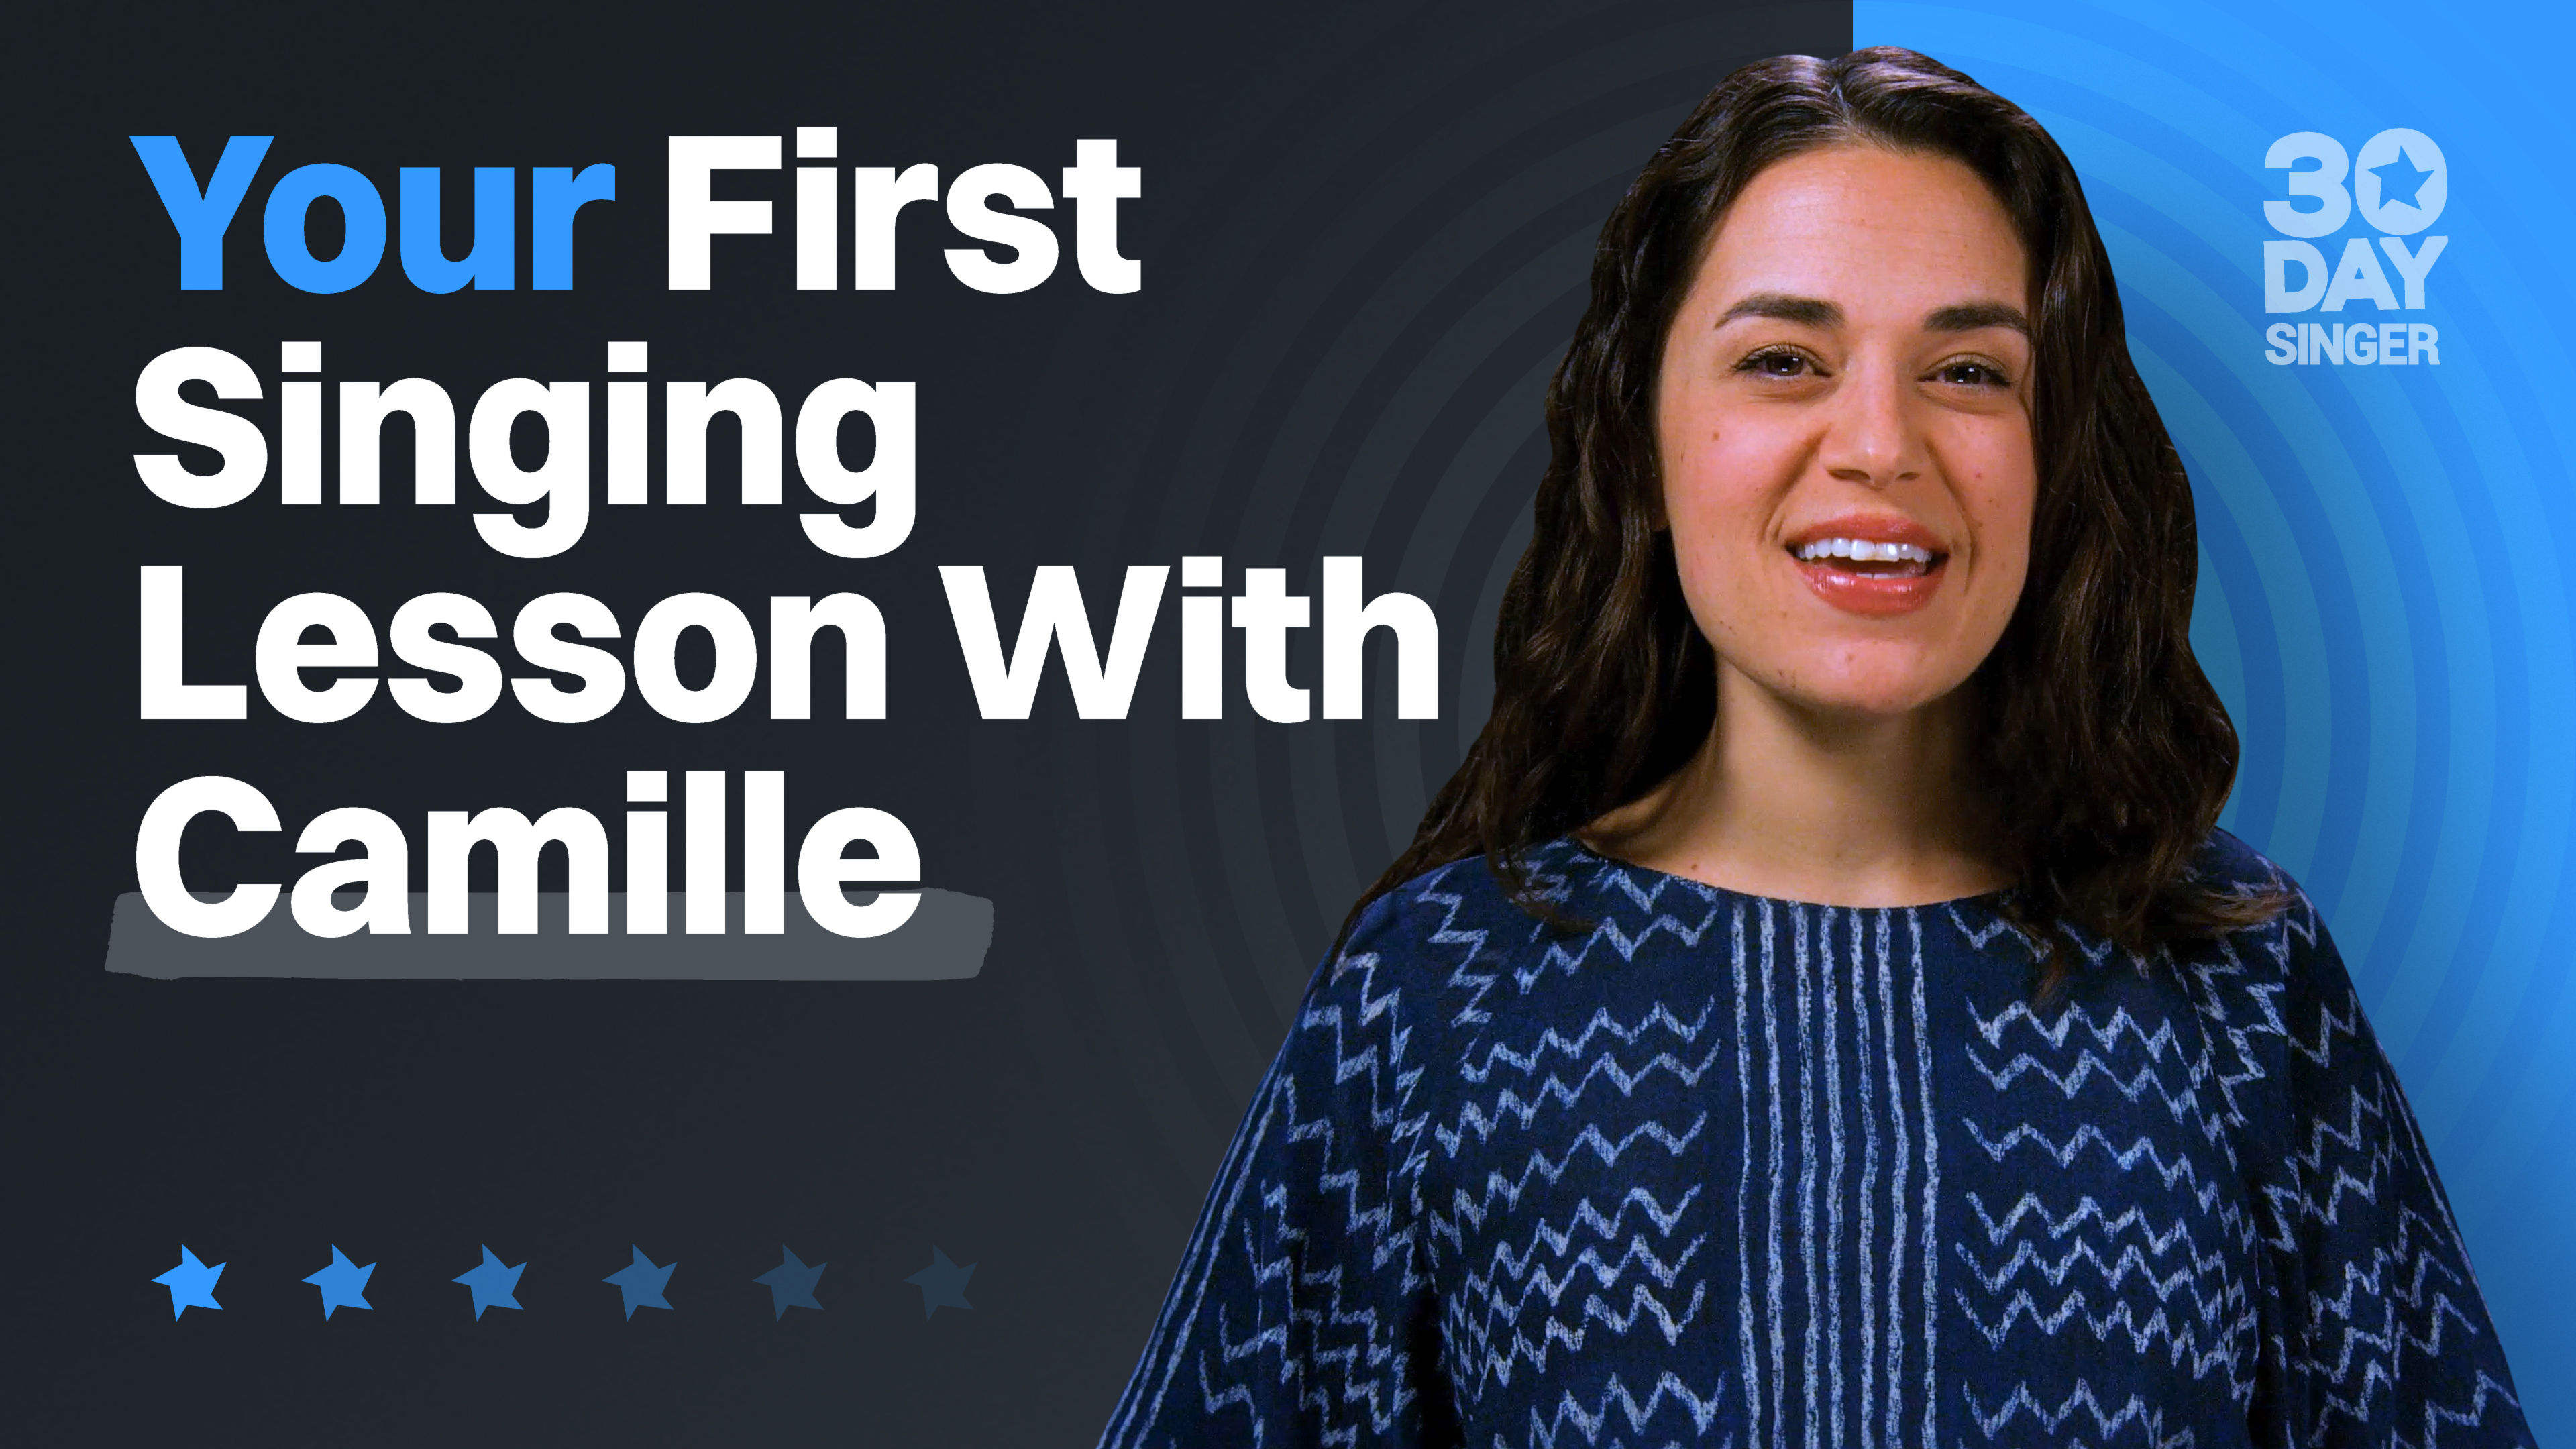 Your First Singing Lesson With Camille